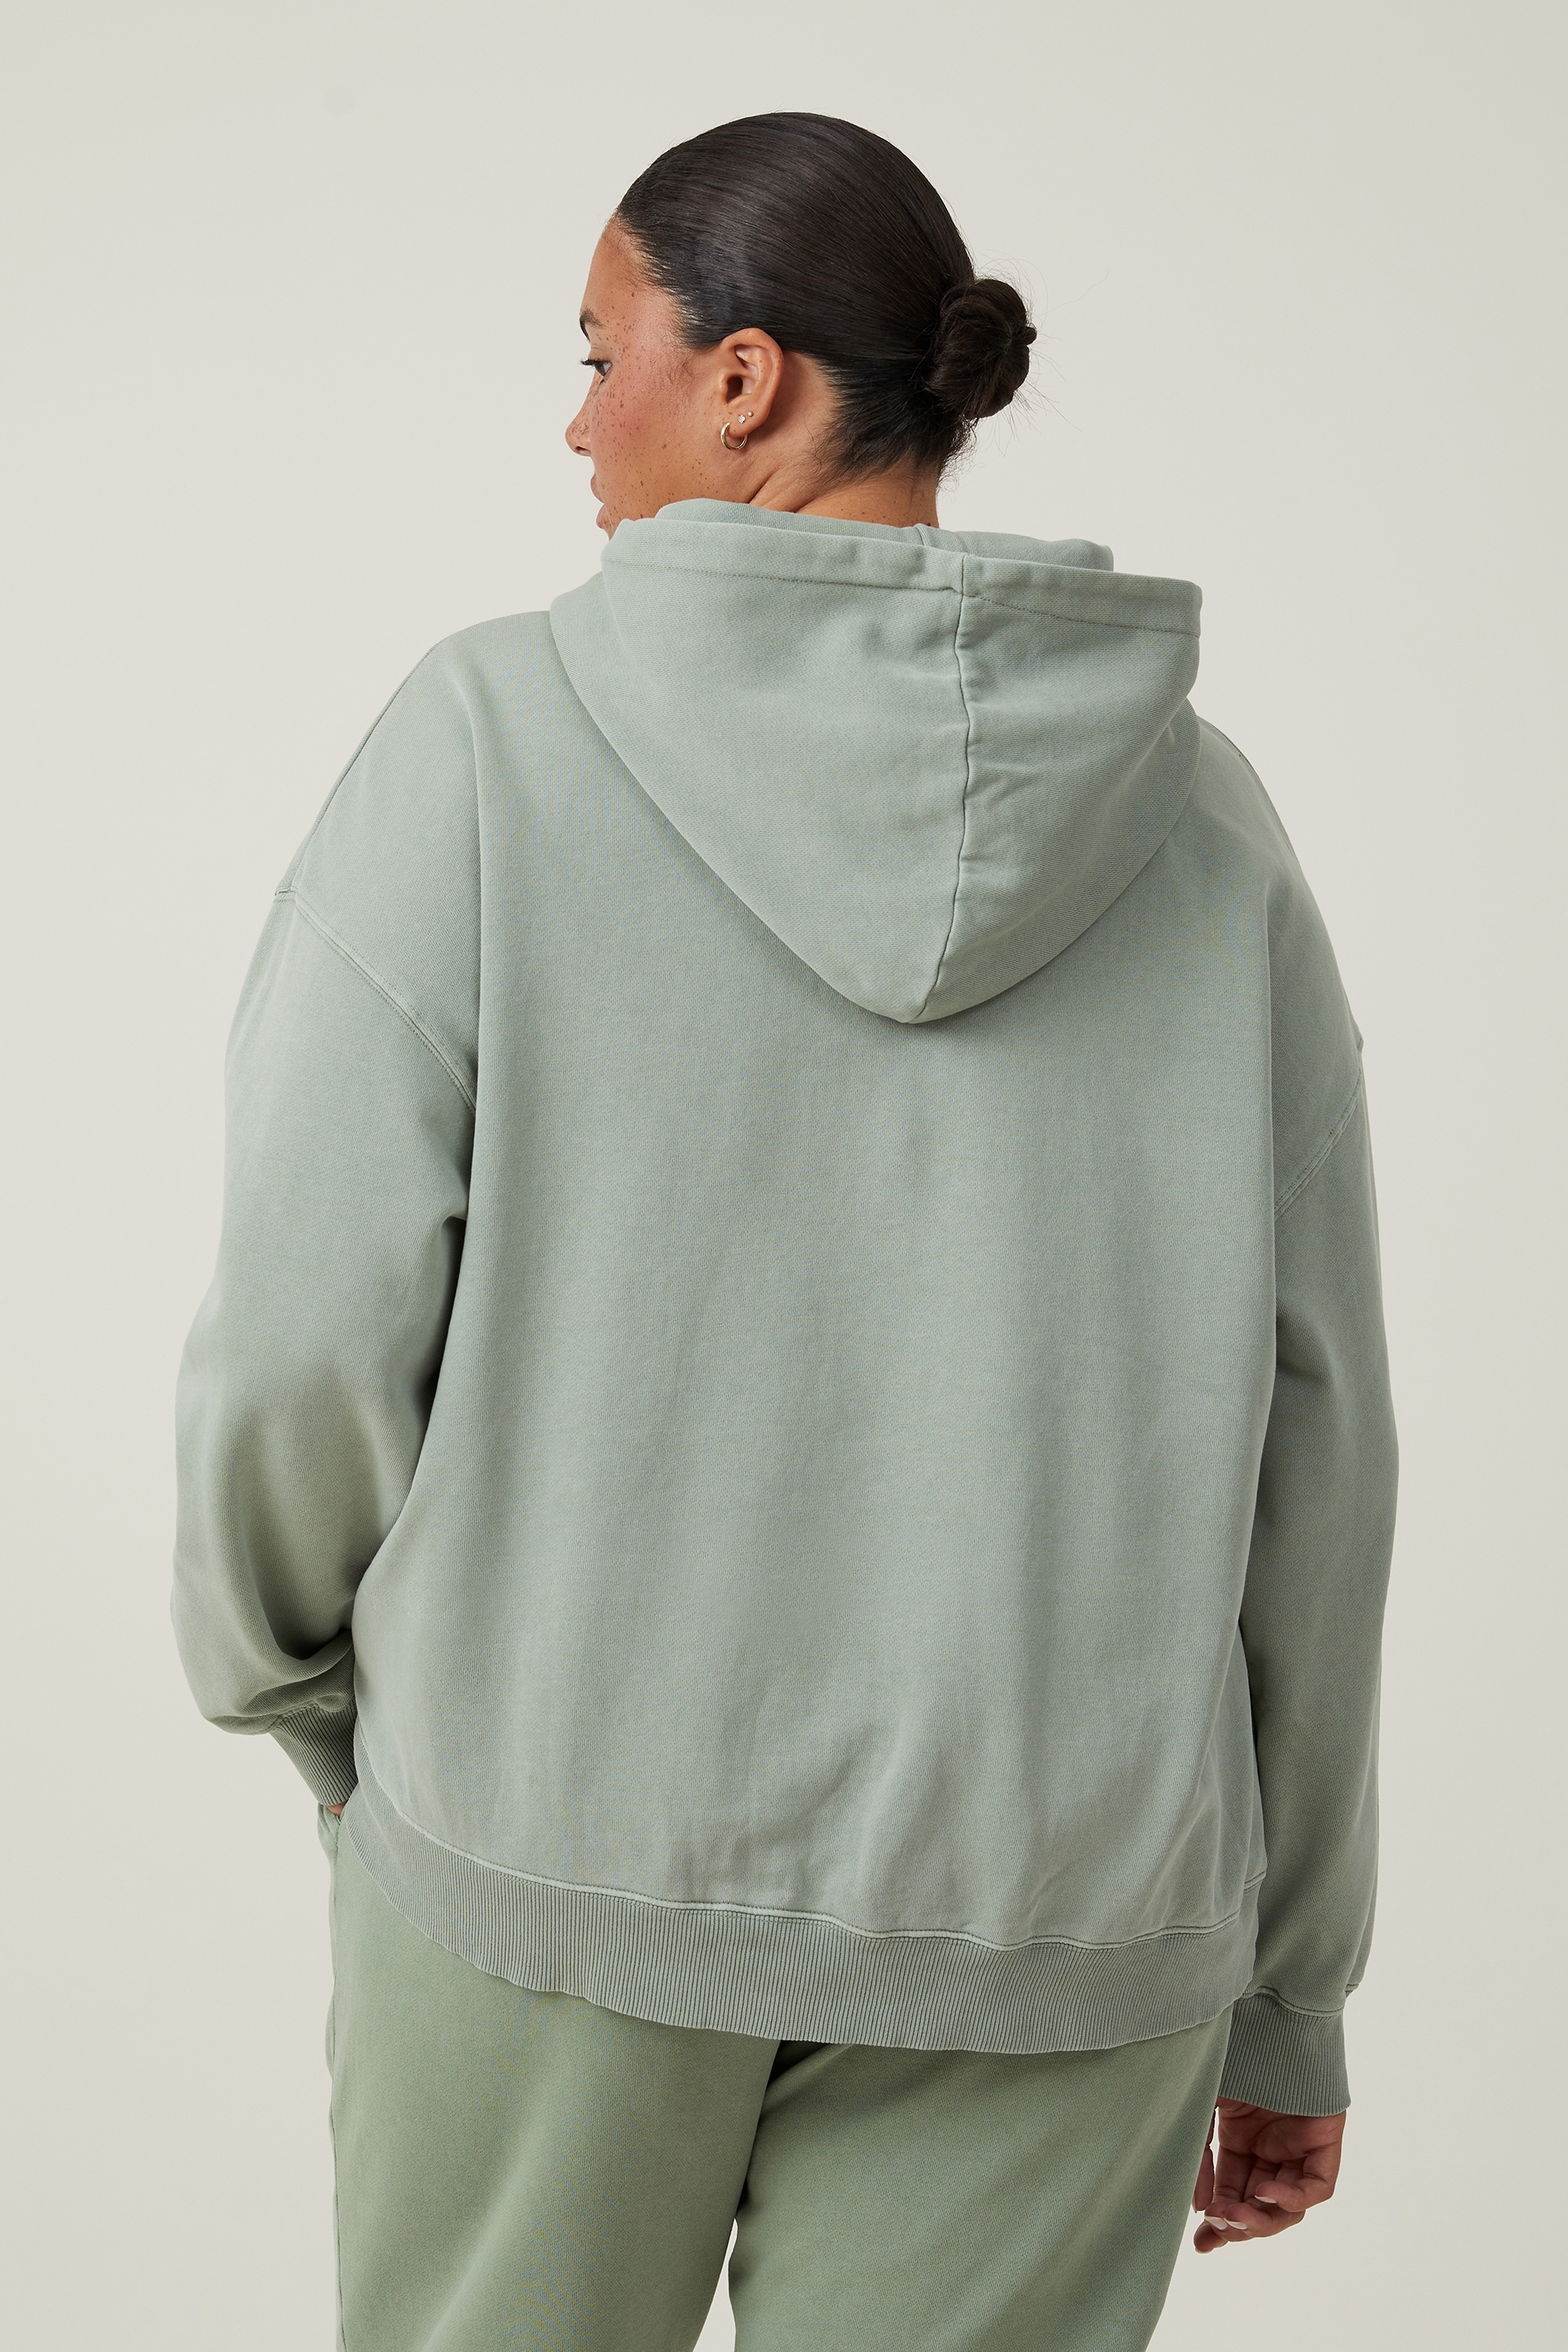 Cotton on Women - Classic Washed Zip-Through Hoodie - Washed Sage